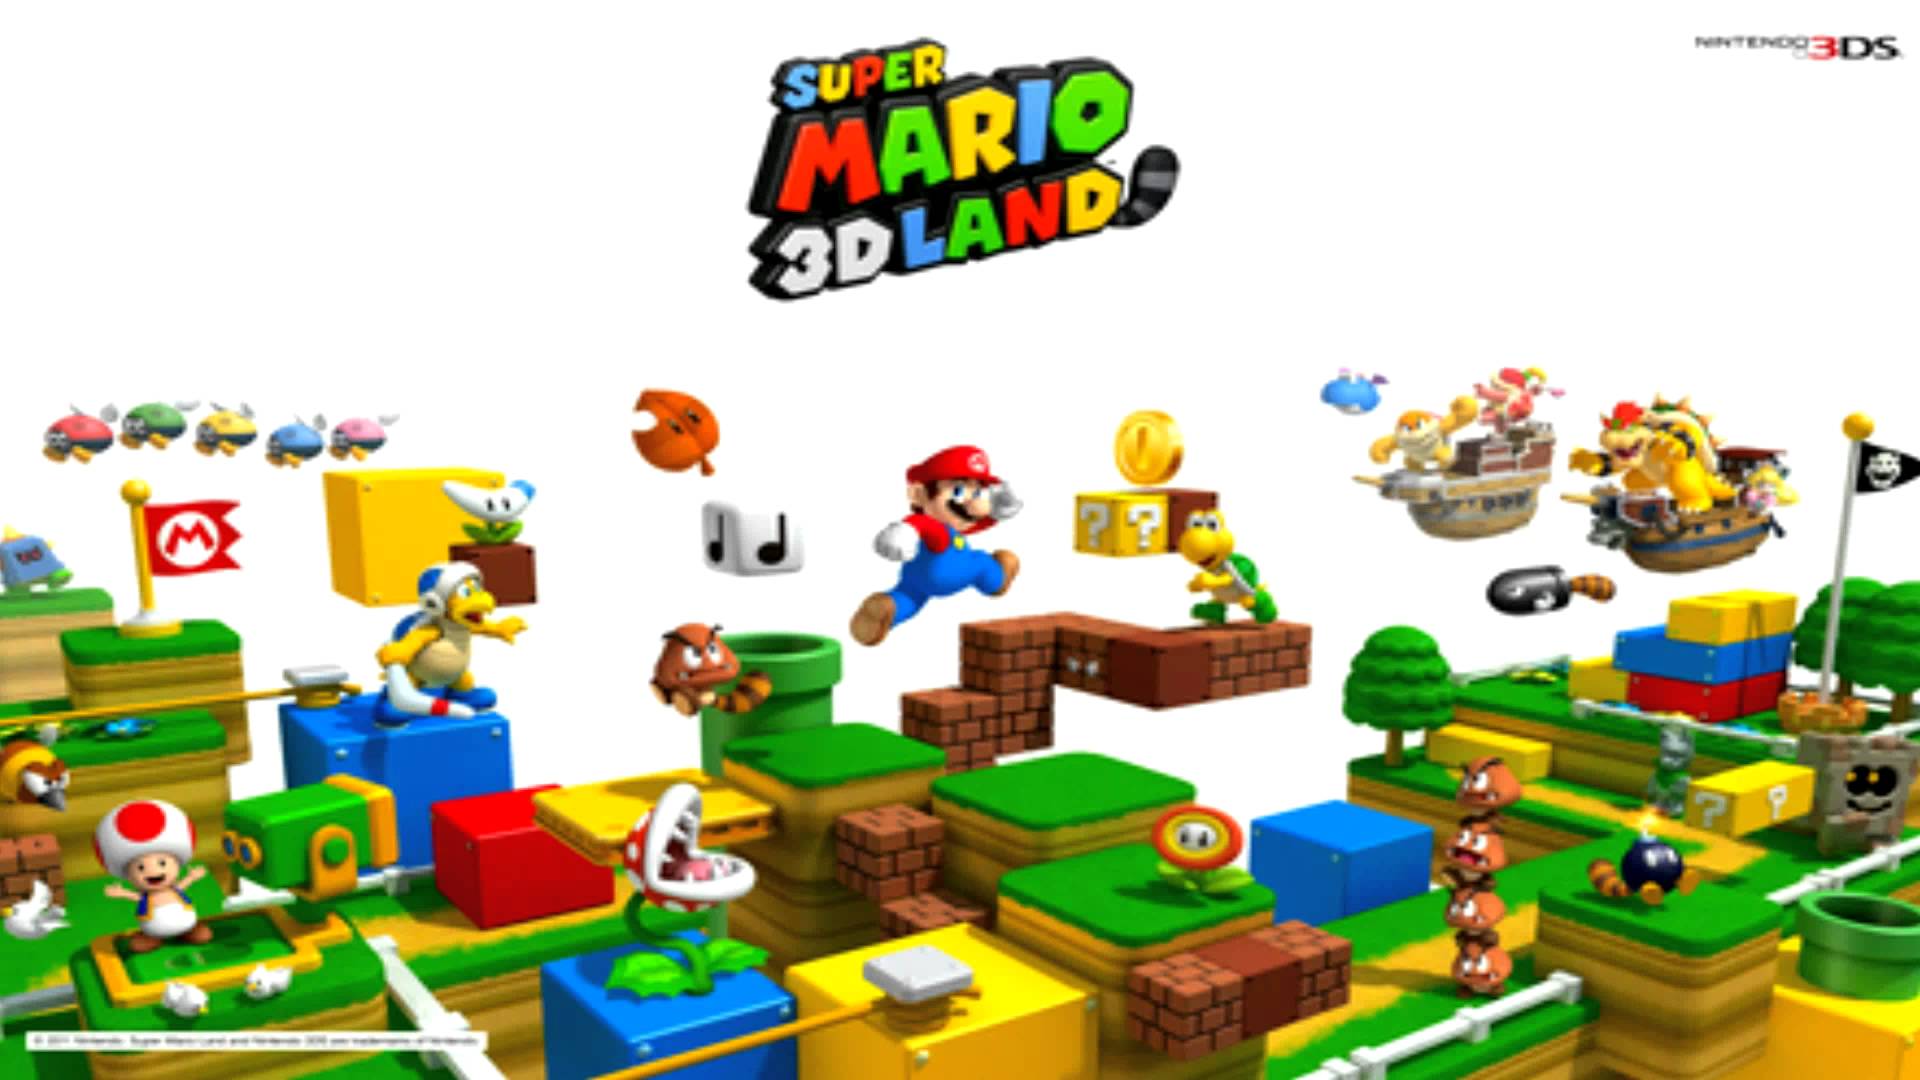 Nice wallpapers Super Mario 3D Land 1920x1080px